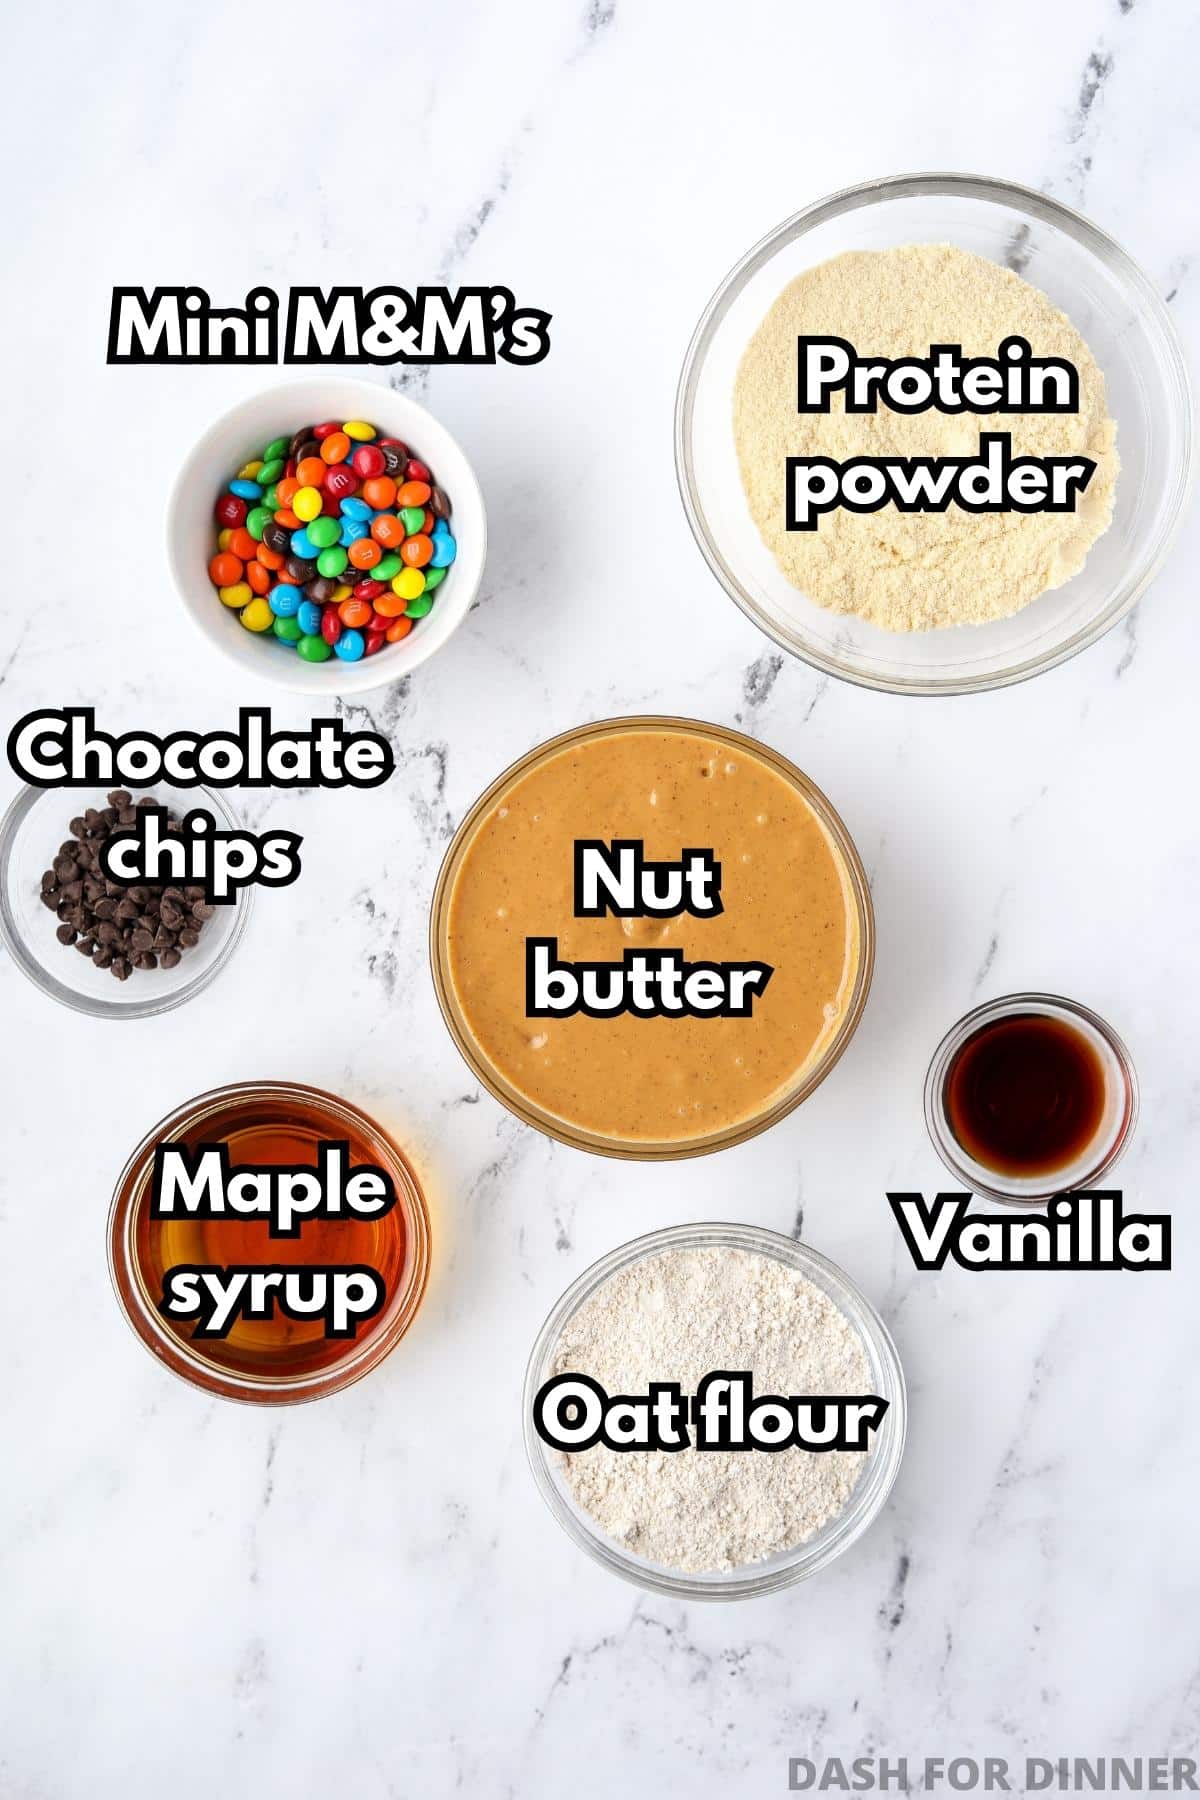 An overhead view of different bowls with different ingredients, including: nut butter, protein powder, mini M&m's, chocolate chips, maple syrup, etc.